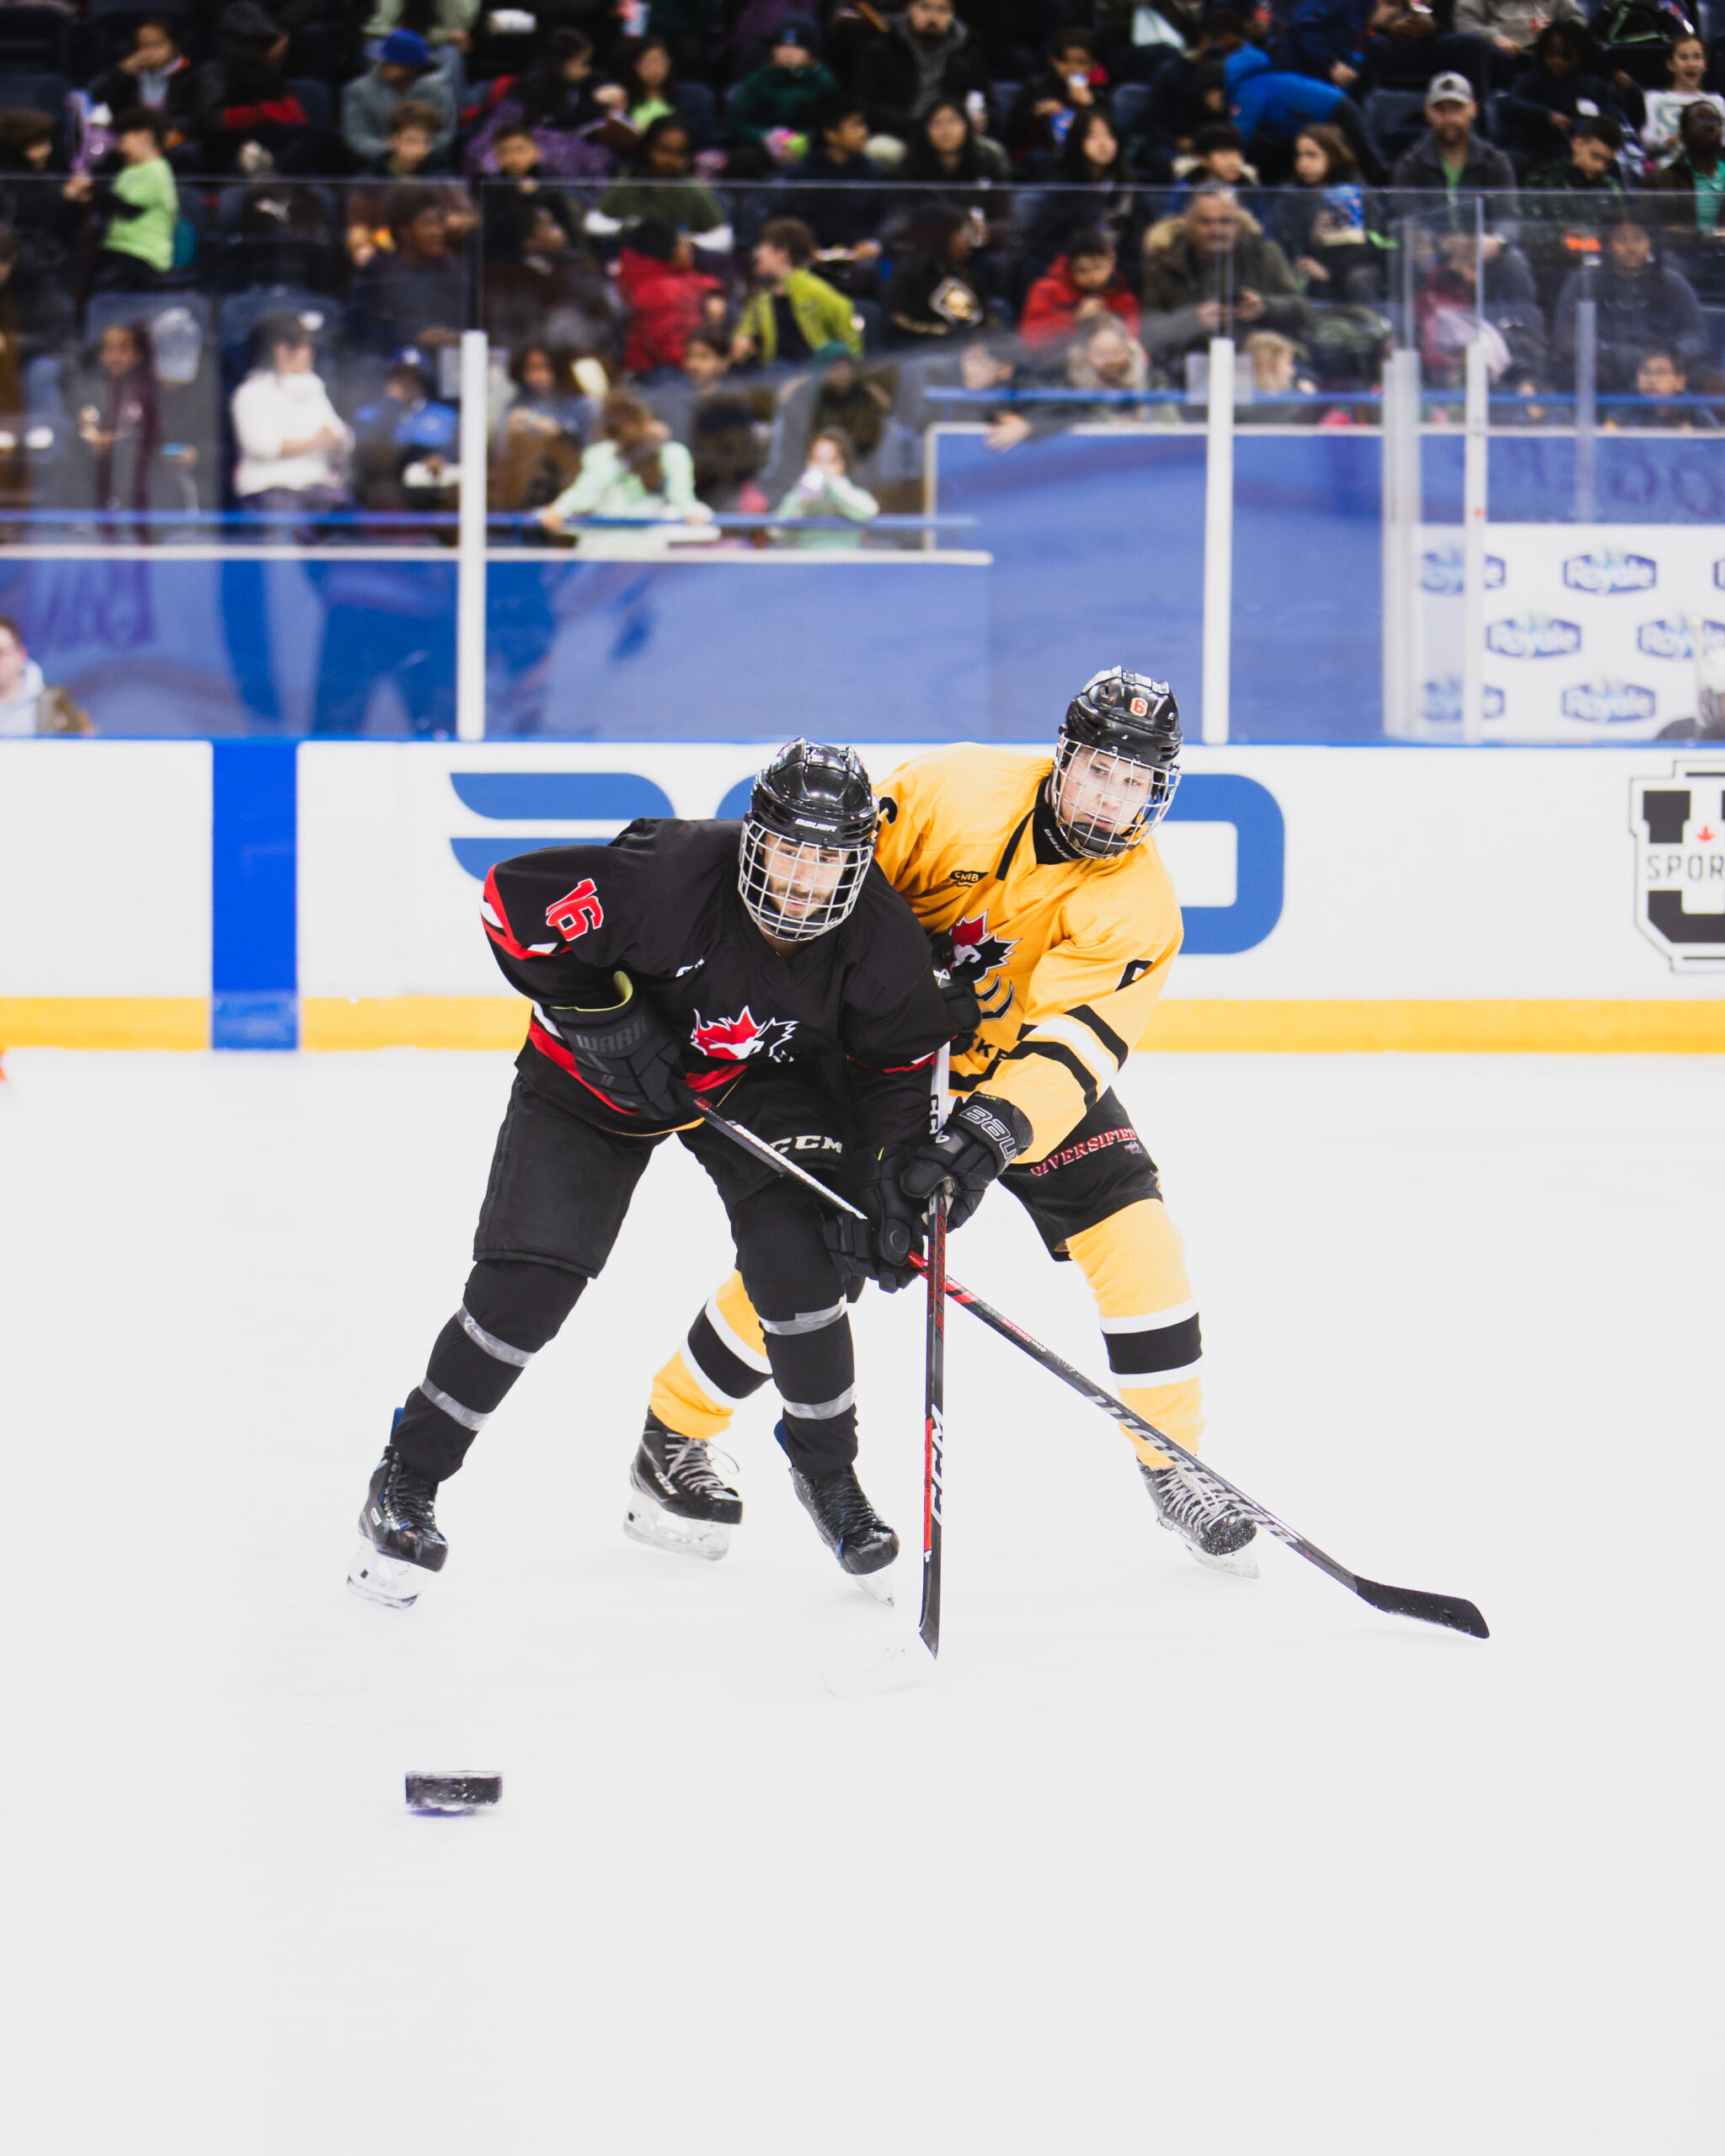 Returning national team player Chaz Misuraza wearing a black jersey battles for the blind hockey puck against the newest member of the team Liam O'Callaghan wearing a yellow jersey